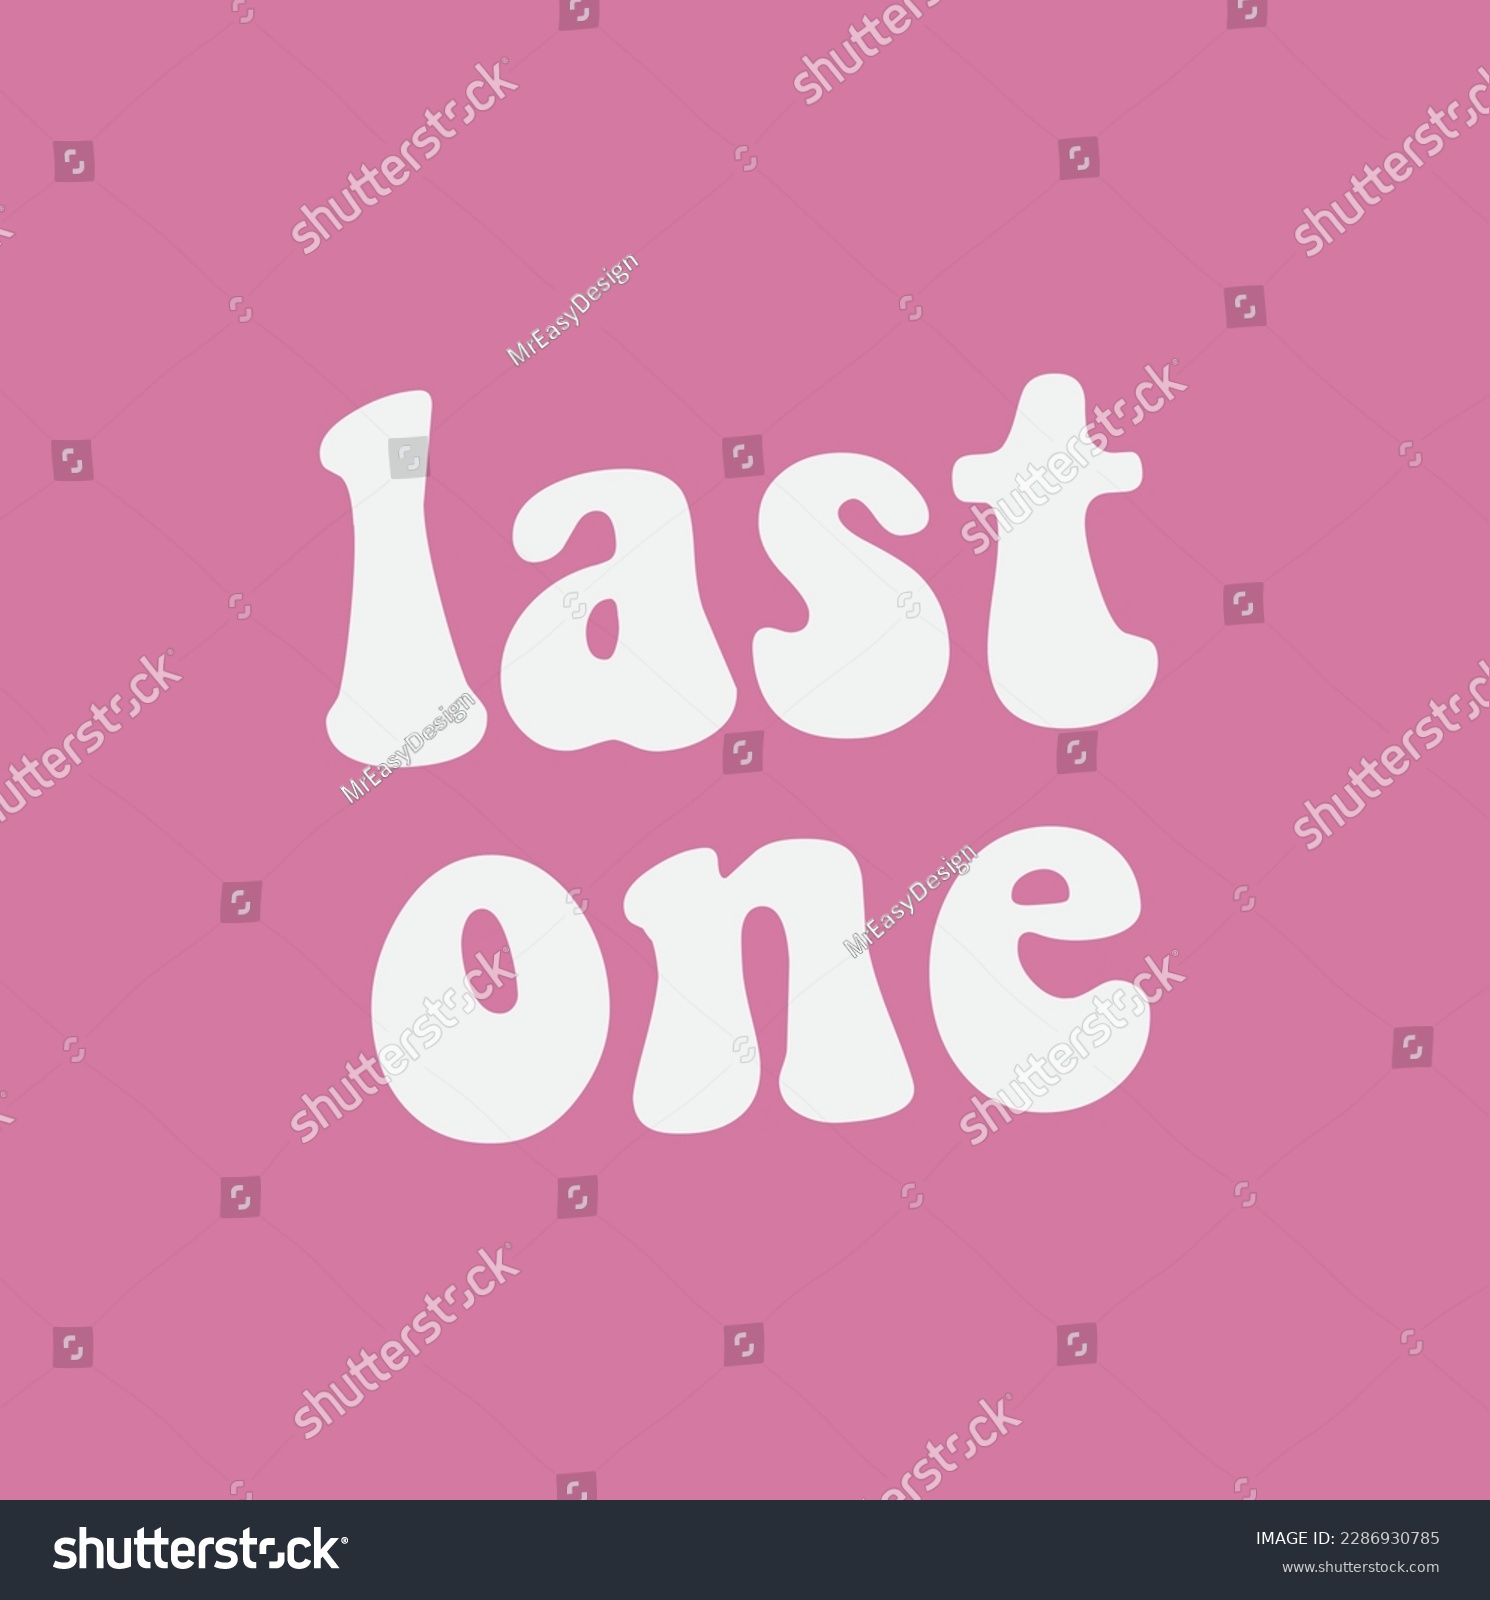 SVG of last one  -Sibling SVG t-shirt design, Hand drawn lettering phrase, Calligraphy t-shirt design, pink background, Handwritten vector. svg